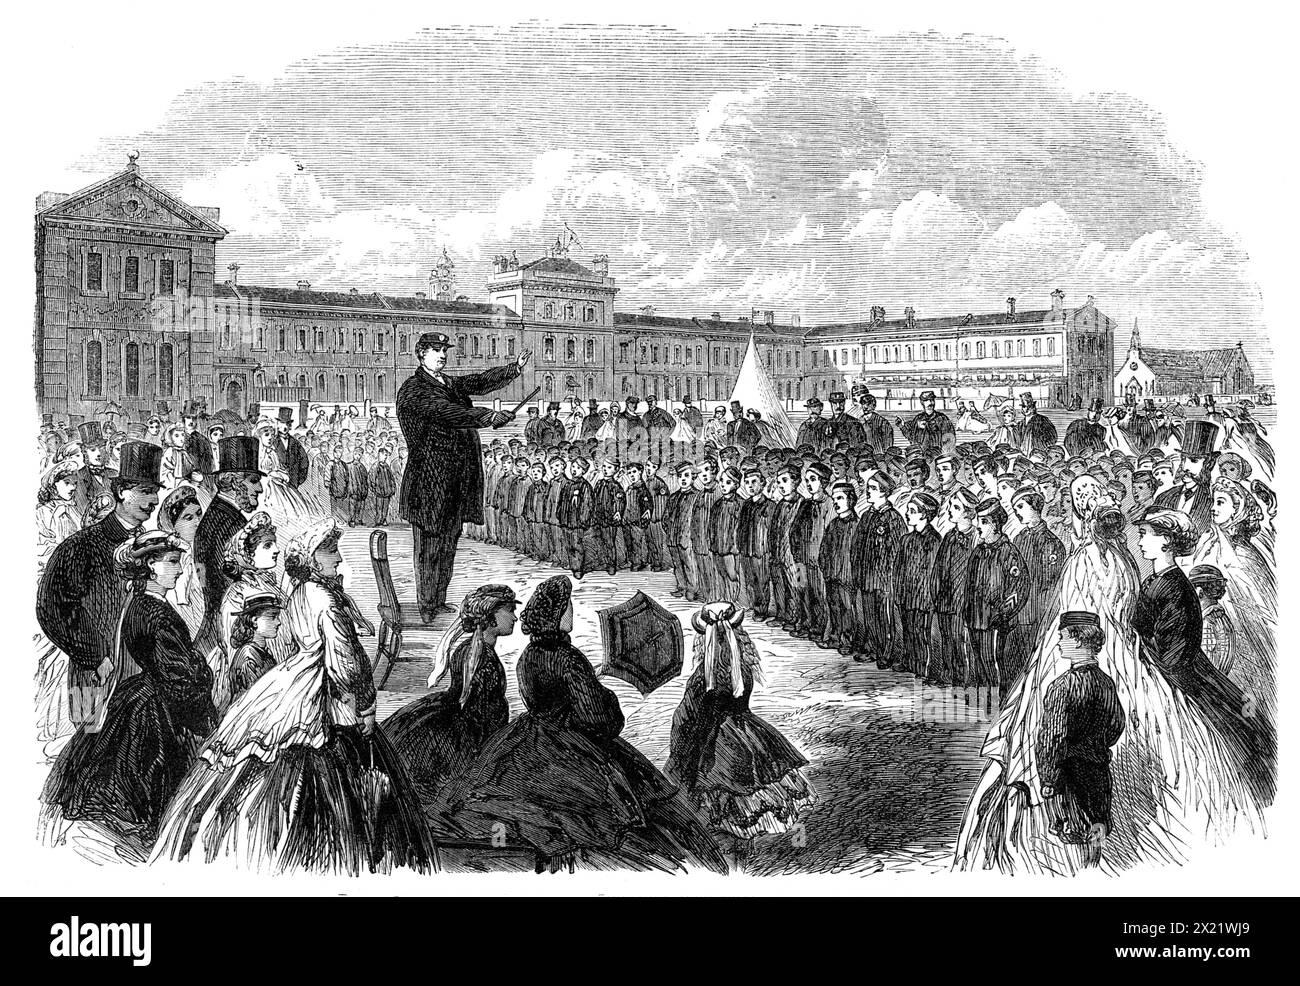 Annual Inspection of the Middlesex Industrial School at Feltham, 1865. 'The annual inspection of the school established at Feltham, near Hounslow,...&quot;to make provision for the care, reformation, and education of juvenile offenders,&quot; took place on Wednesday week. Any boy of age between seven and fourteen who is convicted of any criminal offence may be committed to this school for a period of not less than one year and not more than three. The school is built and supported entirely at the cost of the county rate...The number of inmates averages about 560 boys, under the charge of thirt Stock Photo